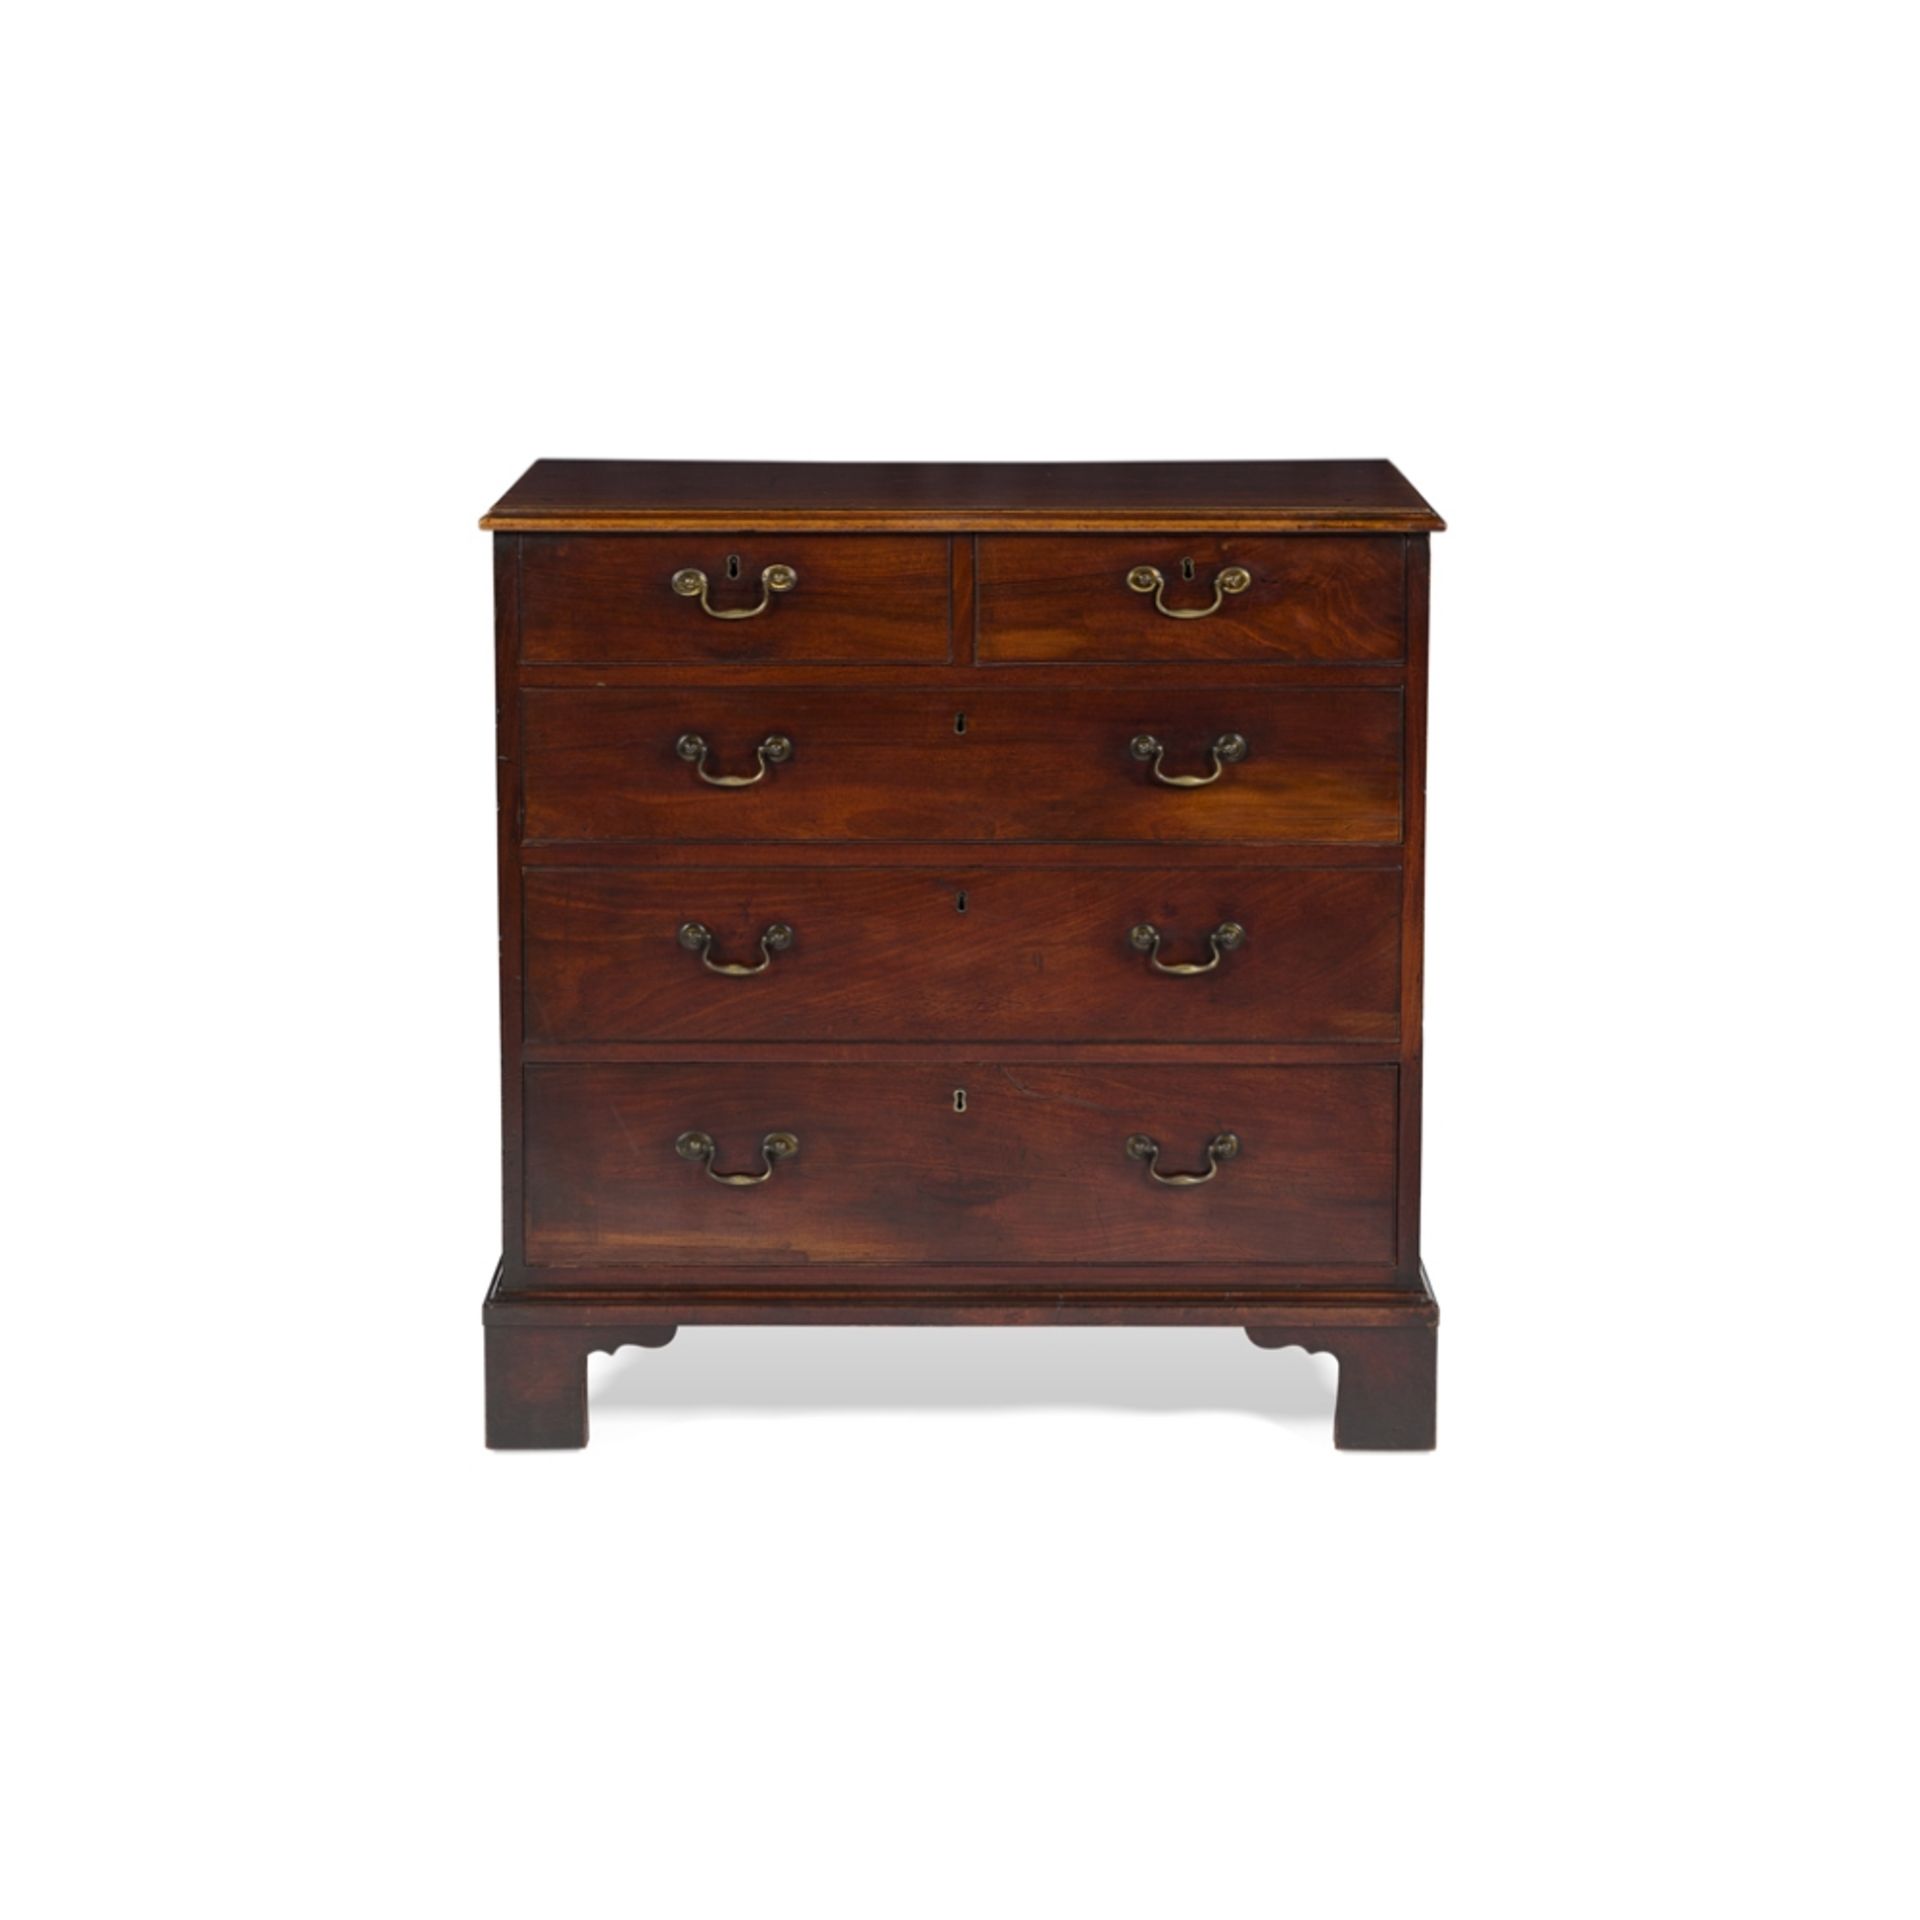 GEORGE III MAHOGANY CHEST OF DRAWERSTHIRD QUARTER 18TH CENTURY the top with a moulded edge above a